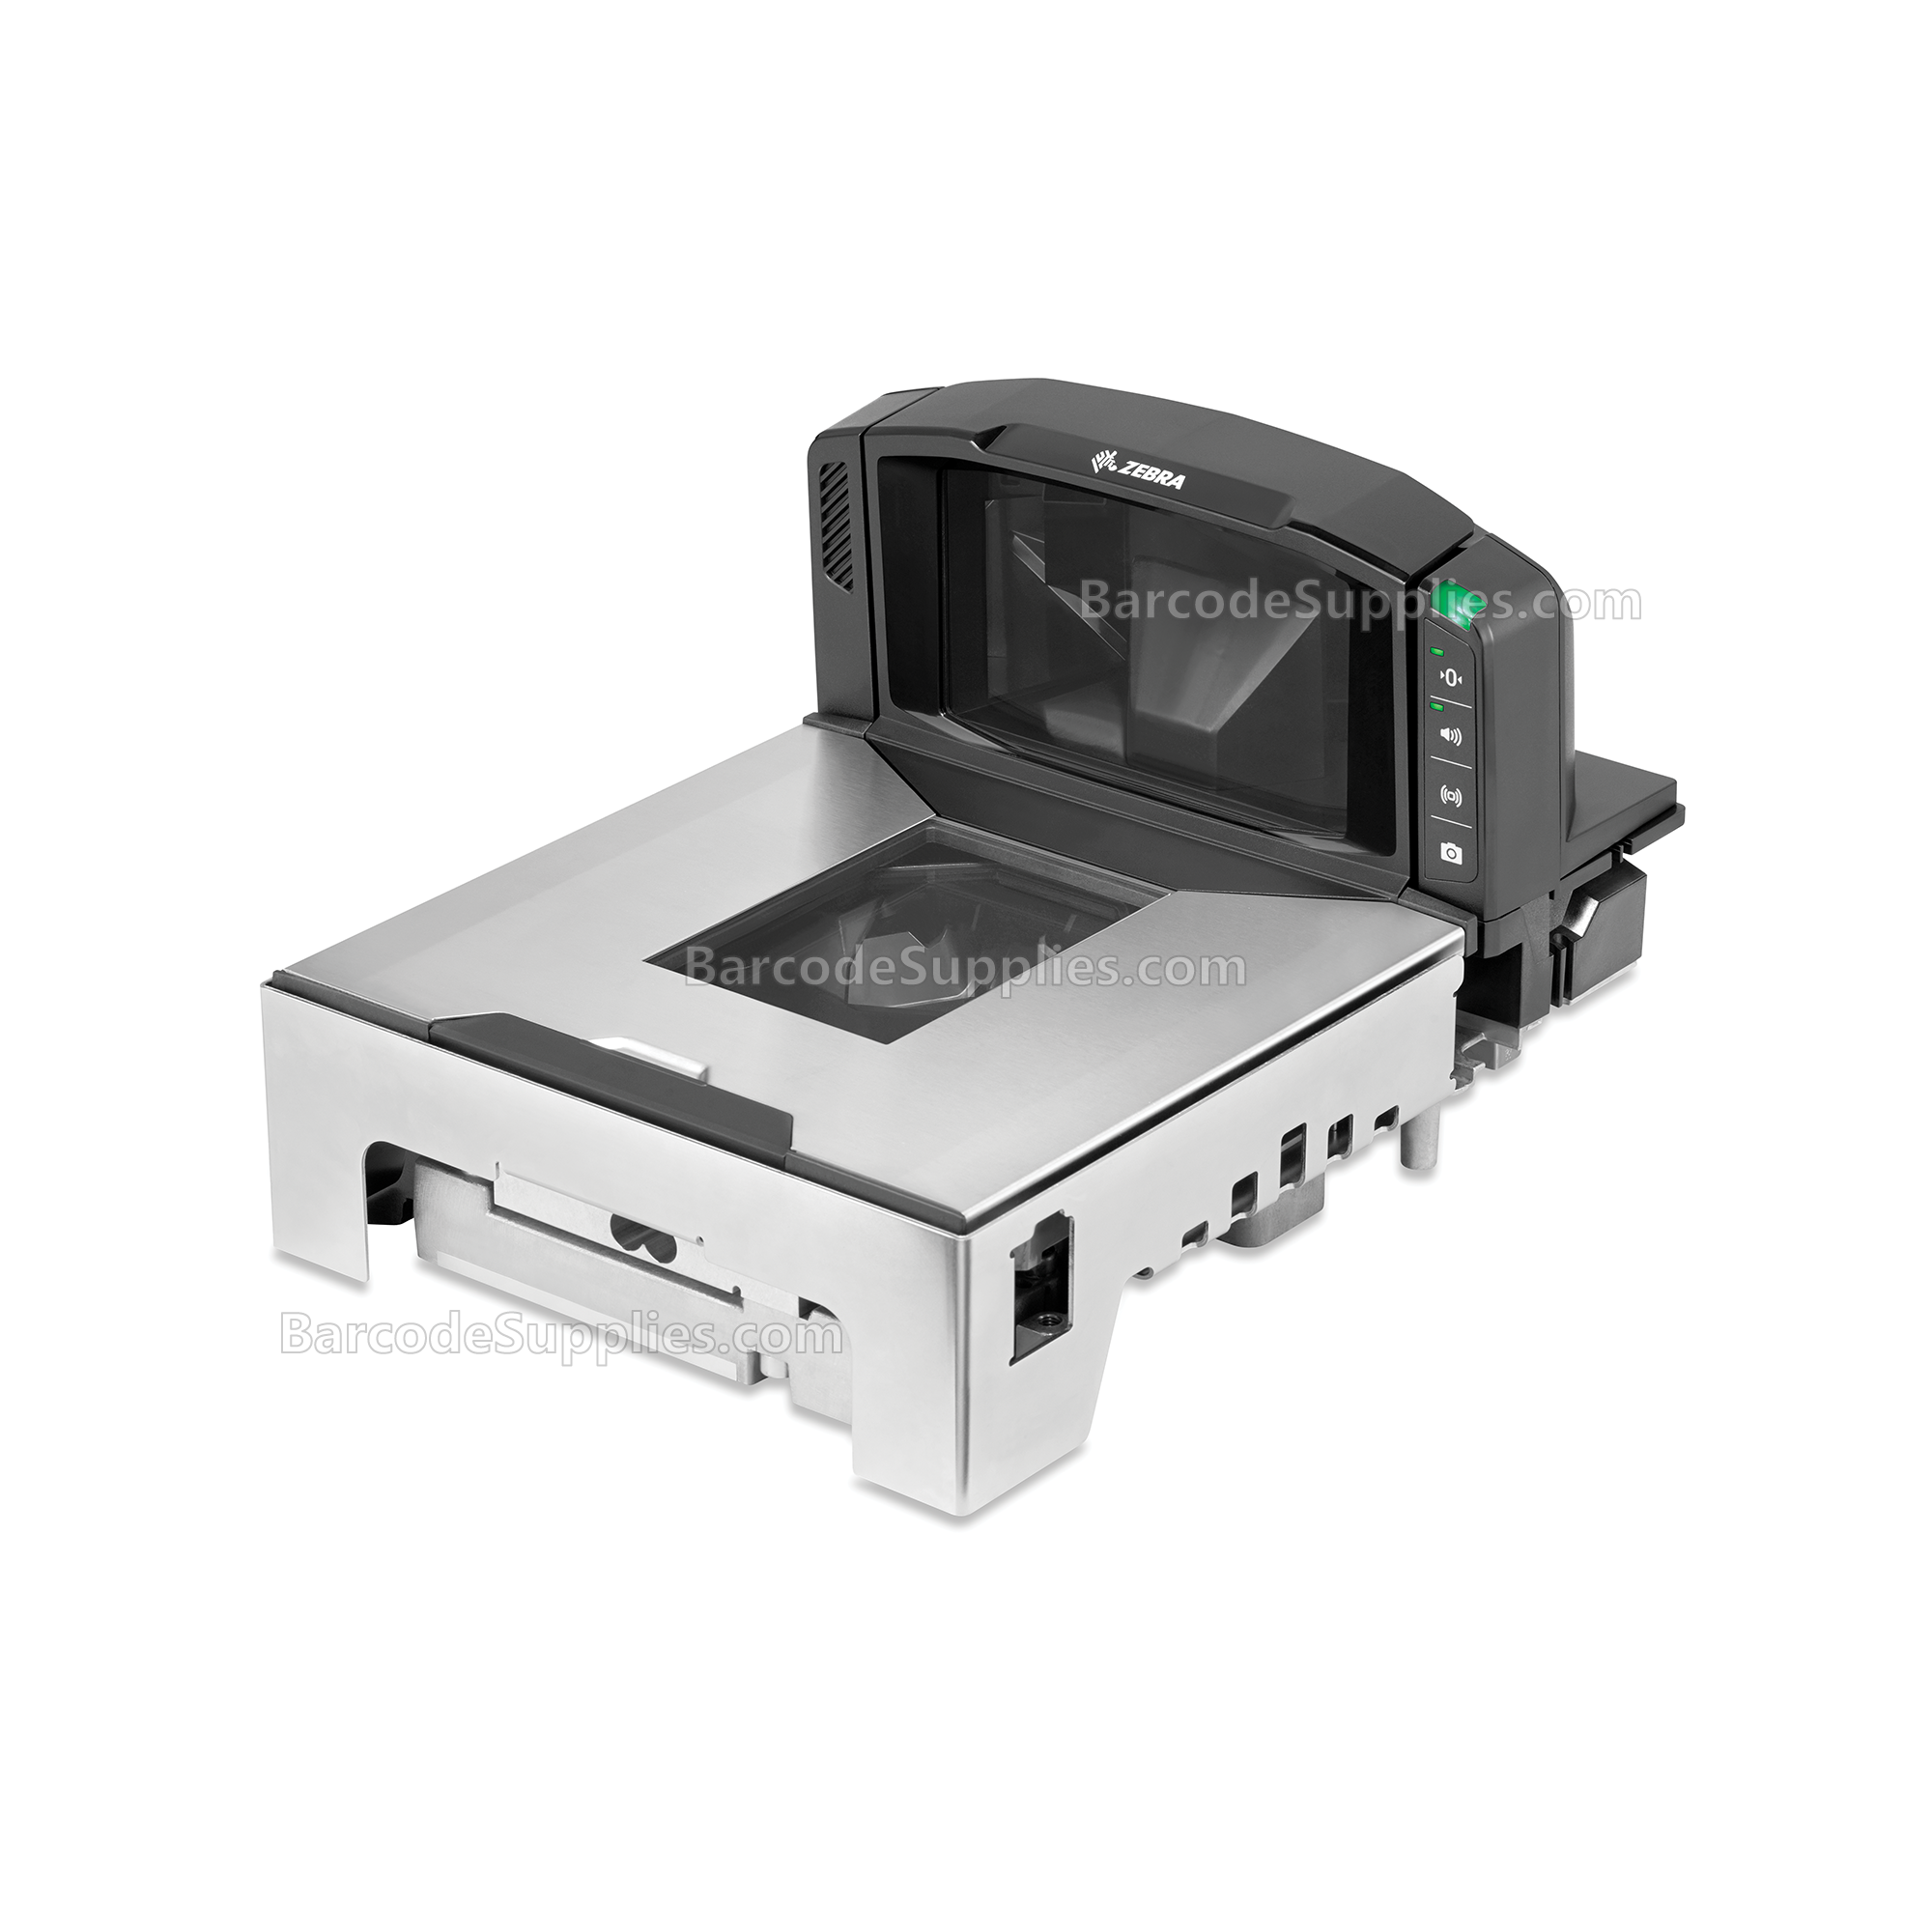 Zebra MP7000: Multiplane scanner, medium, non-sapphire, scanner only/scale ready platter, third party scale support, color camera module landscape, Worldwide